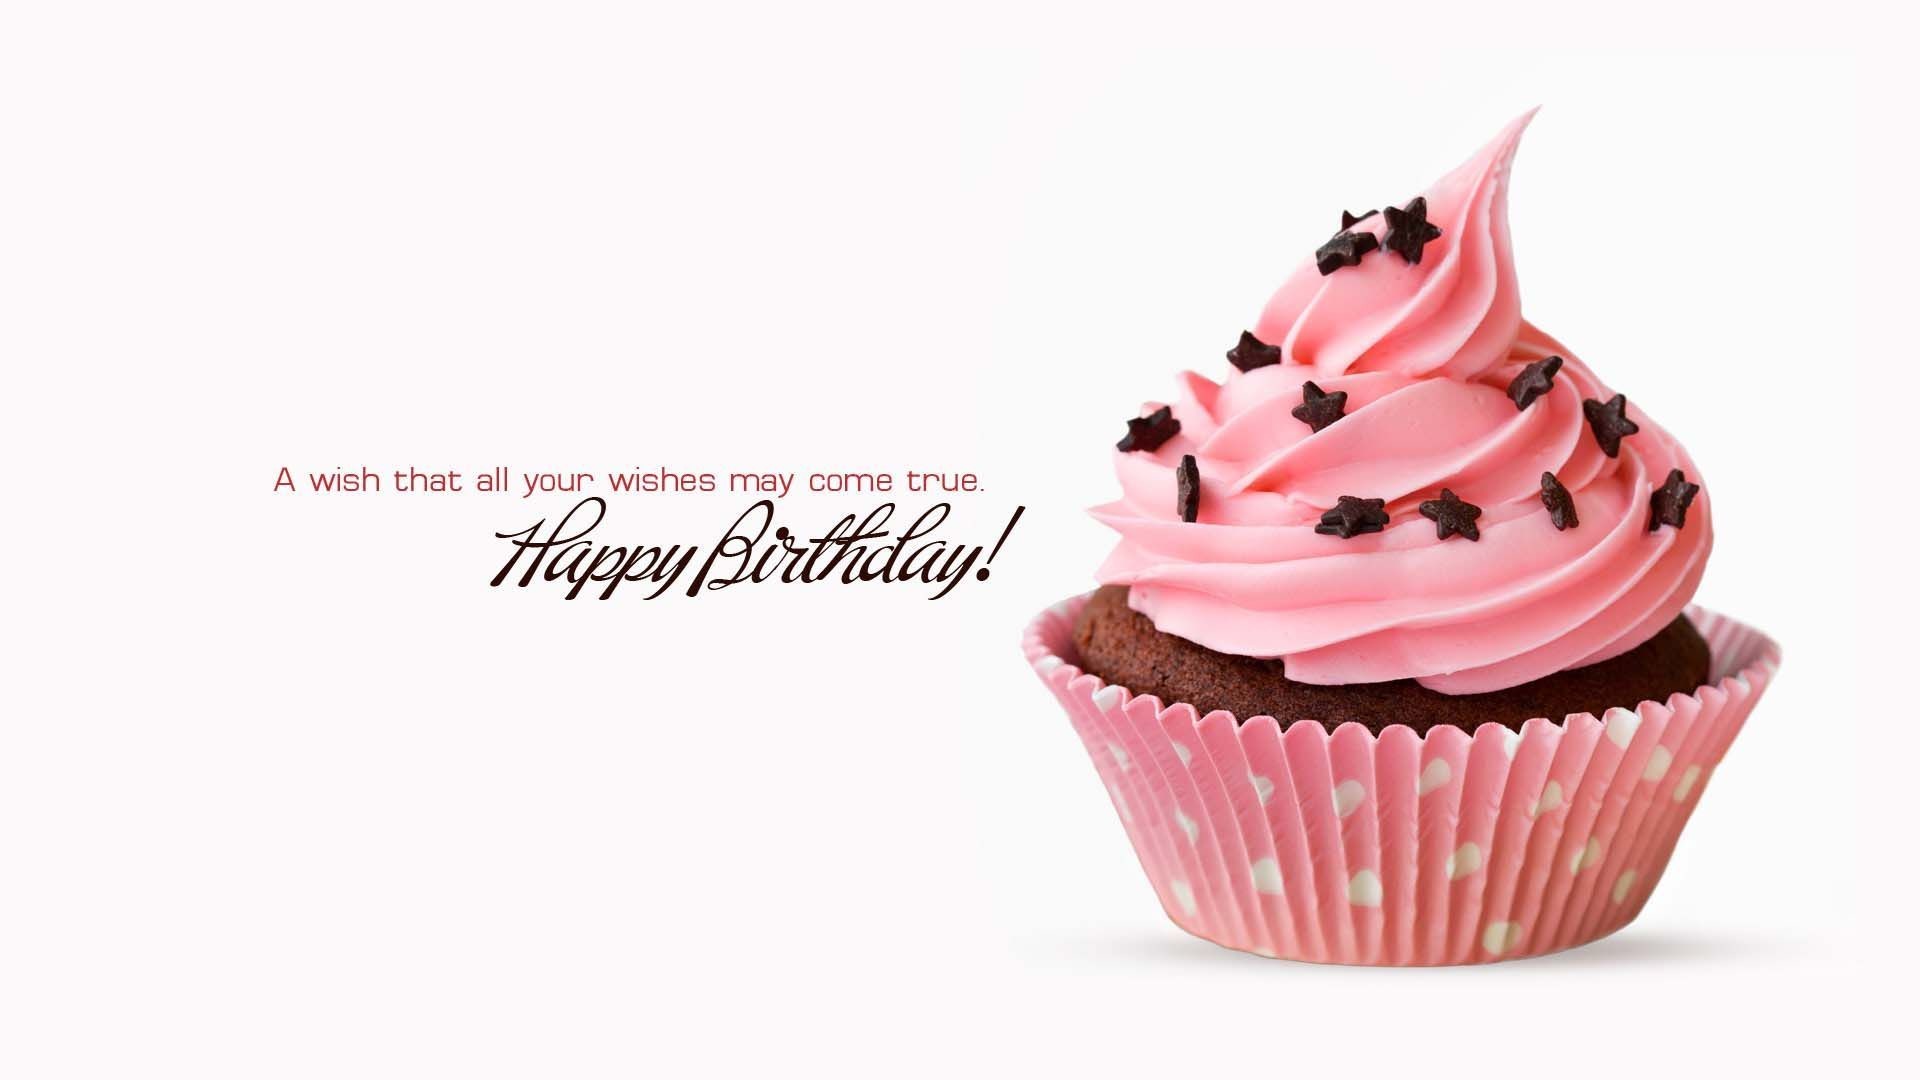 1920x1080 Cute Pink Birthday Cake | HD Birthday Wallpapers for Mobile and Desktop